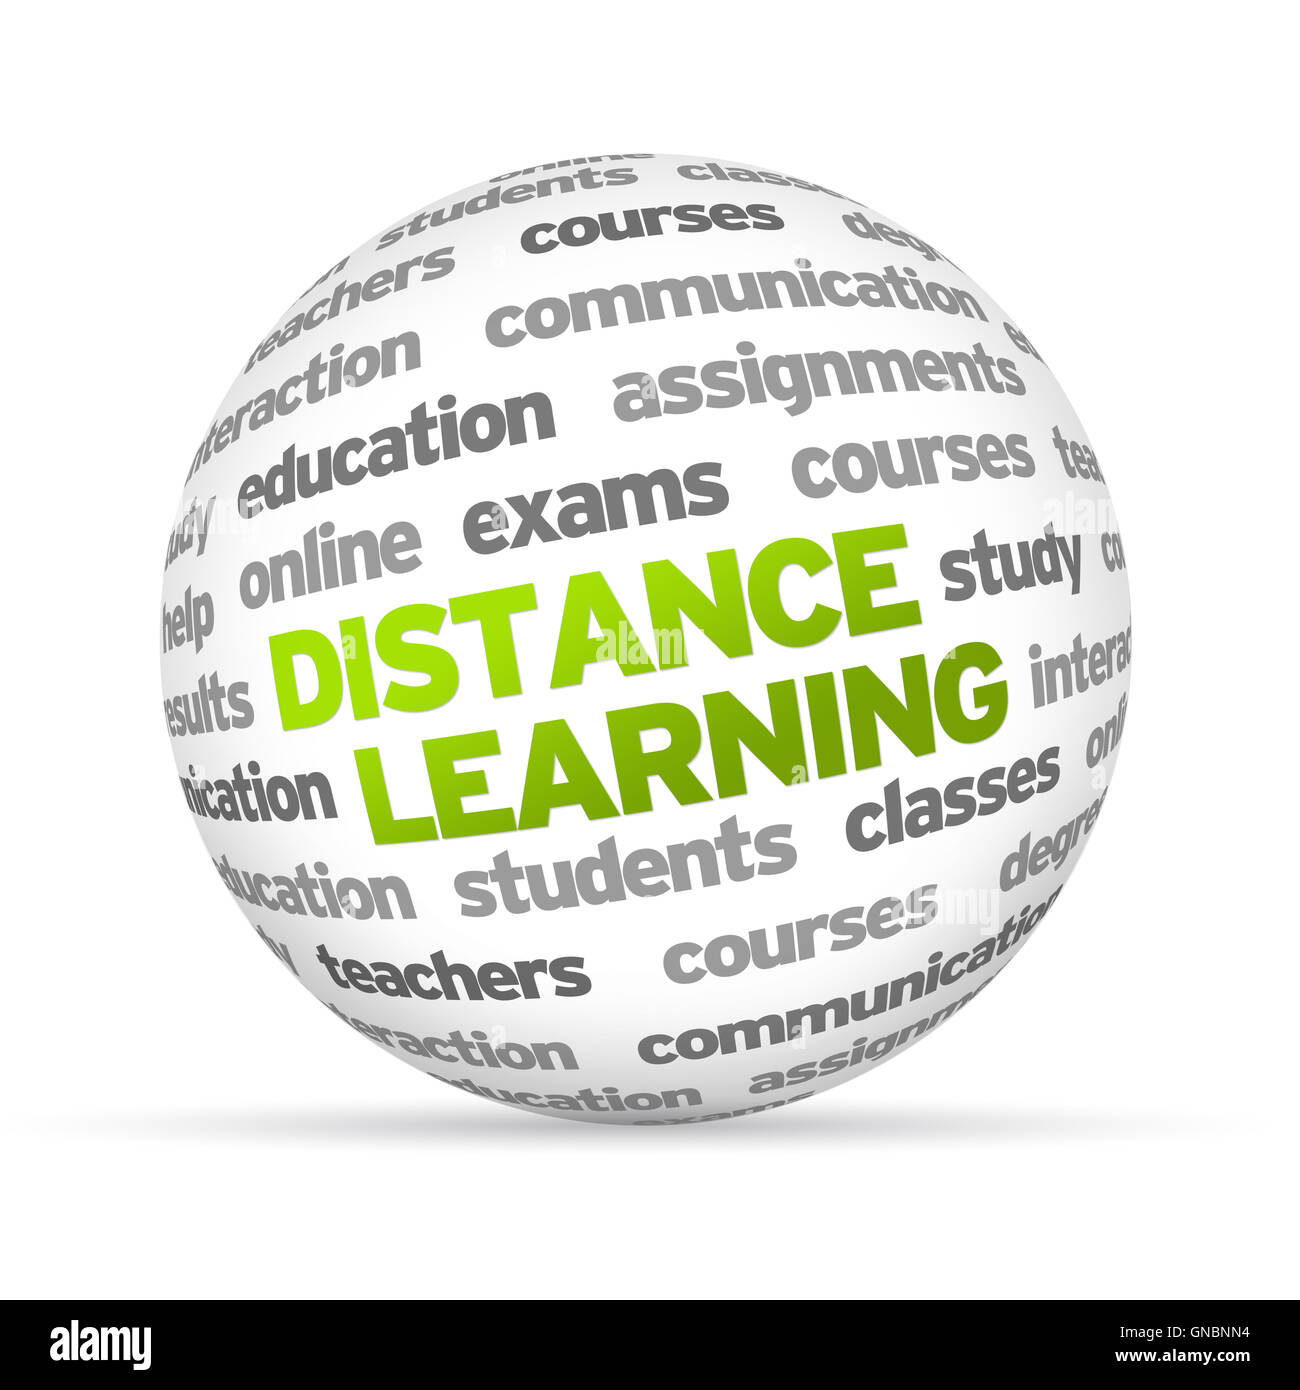 Distance Learning Stockfoto